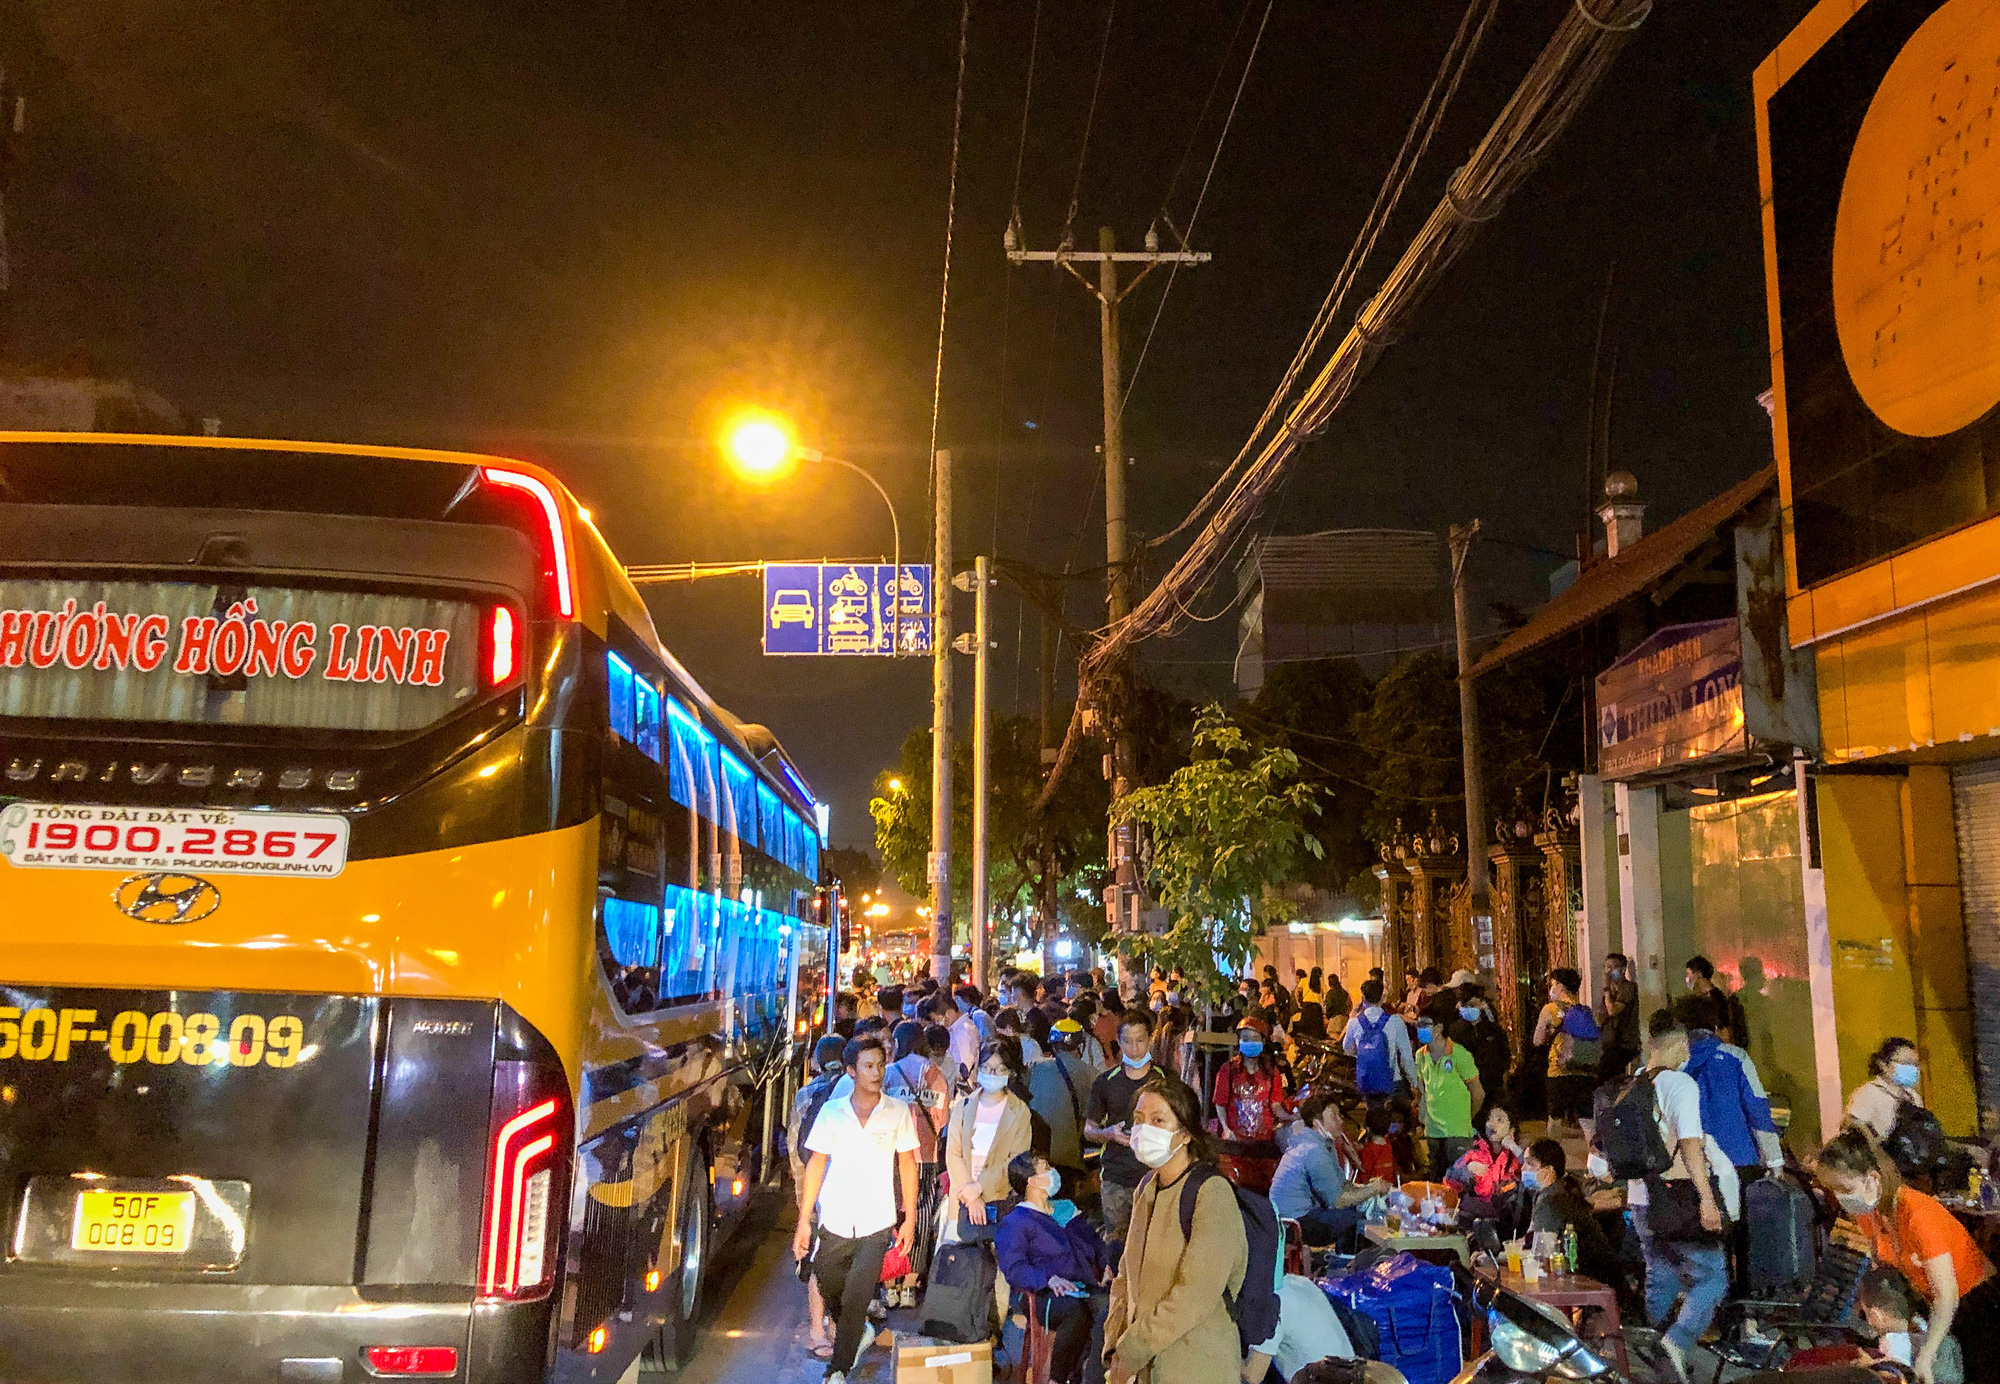 Horrific congestion occurs at Ho Chi Minh City bus station as holiday begins